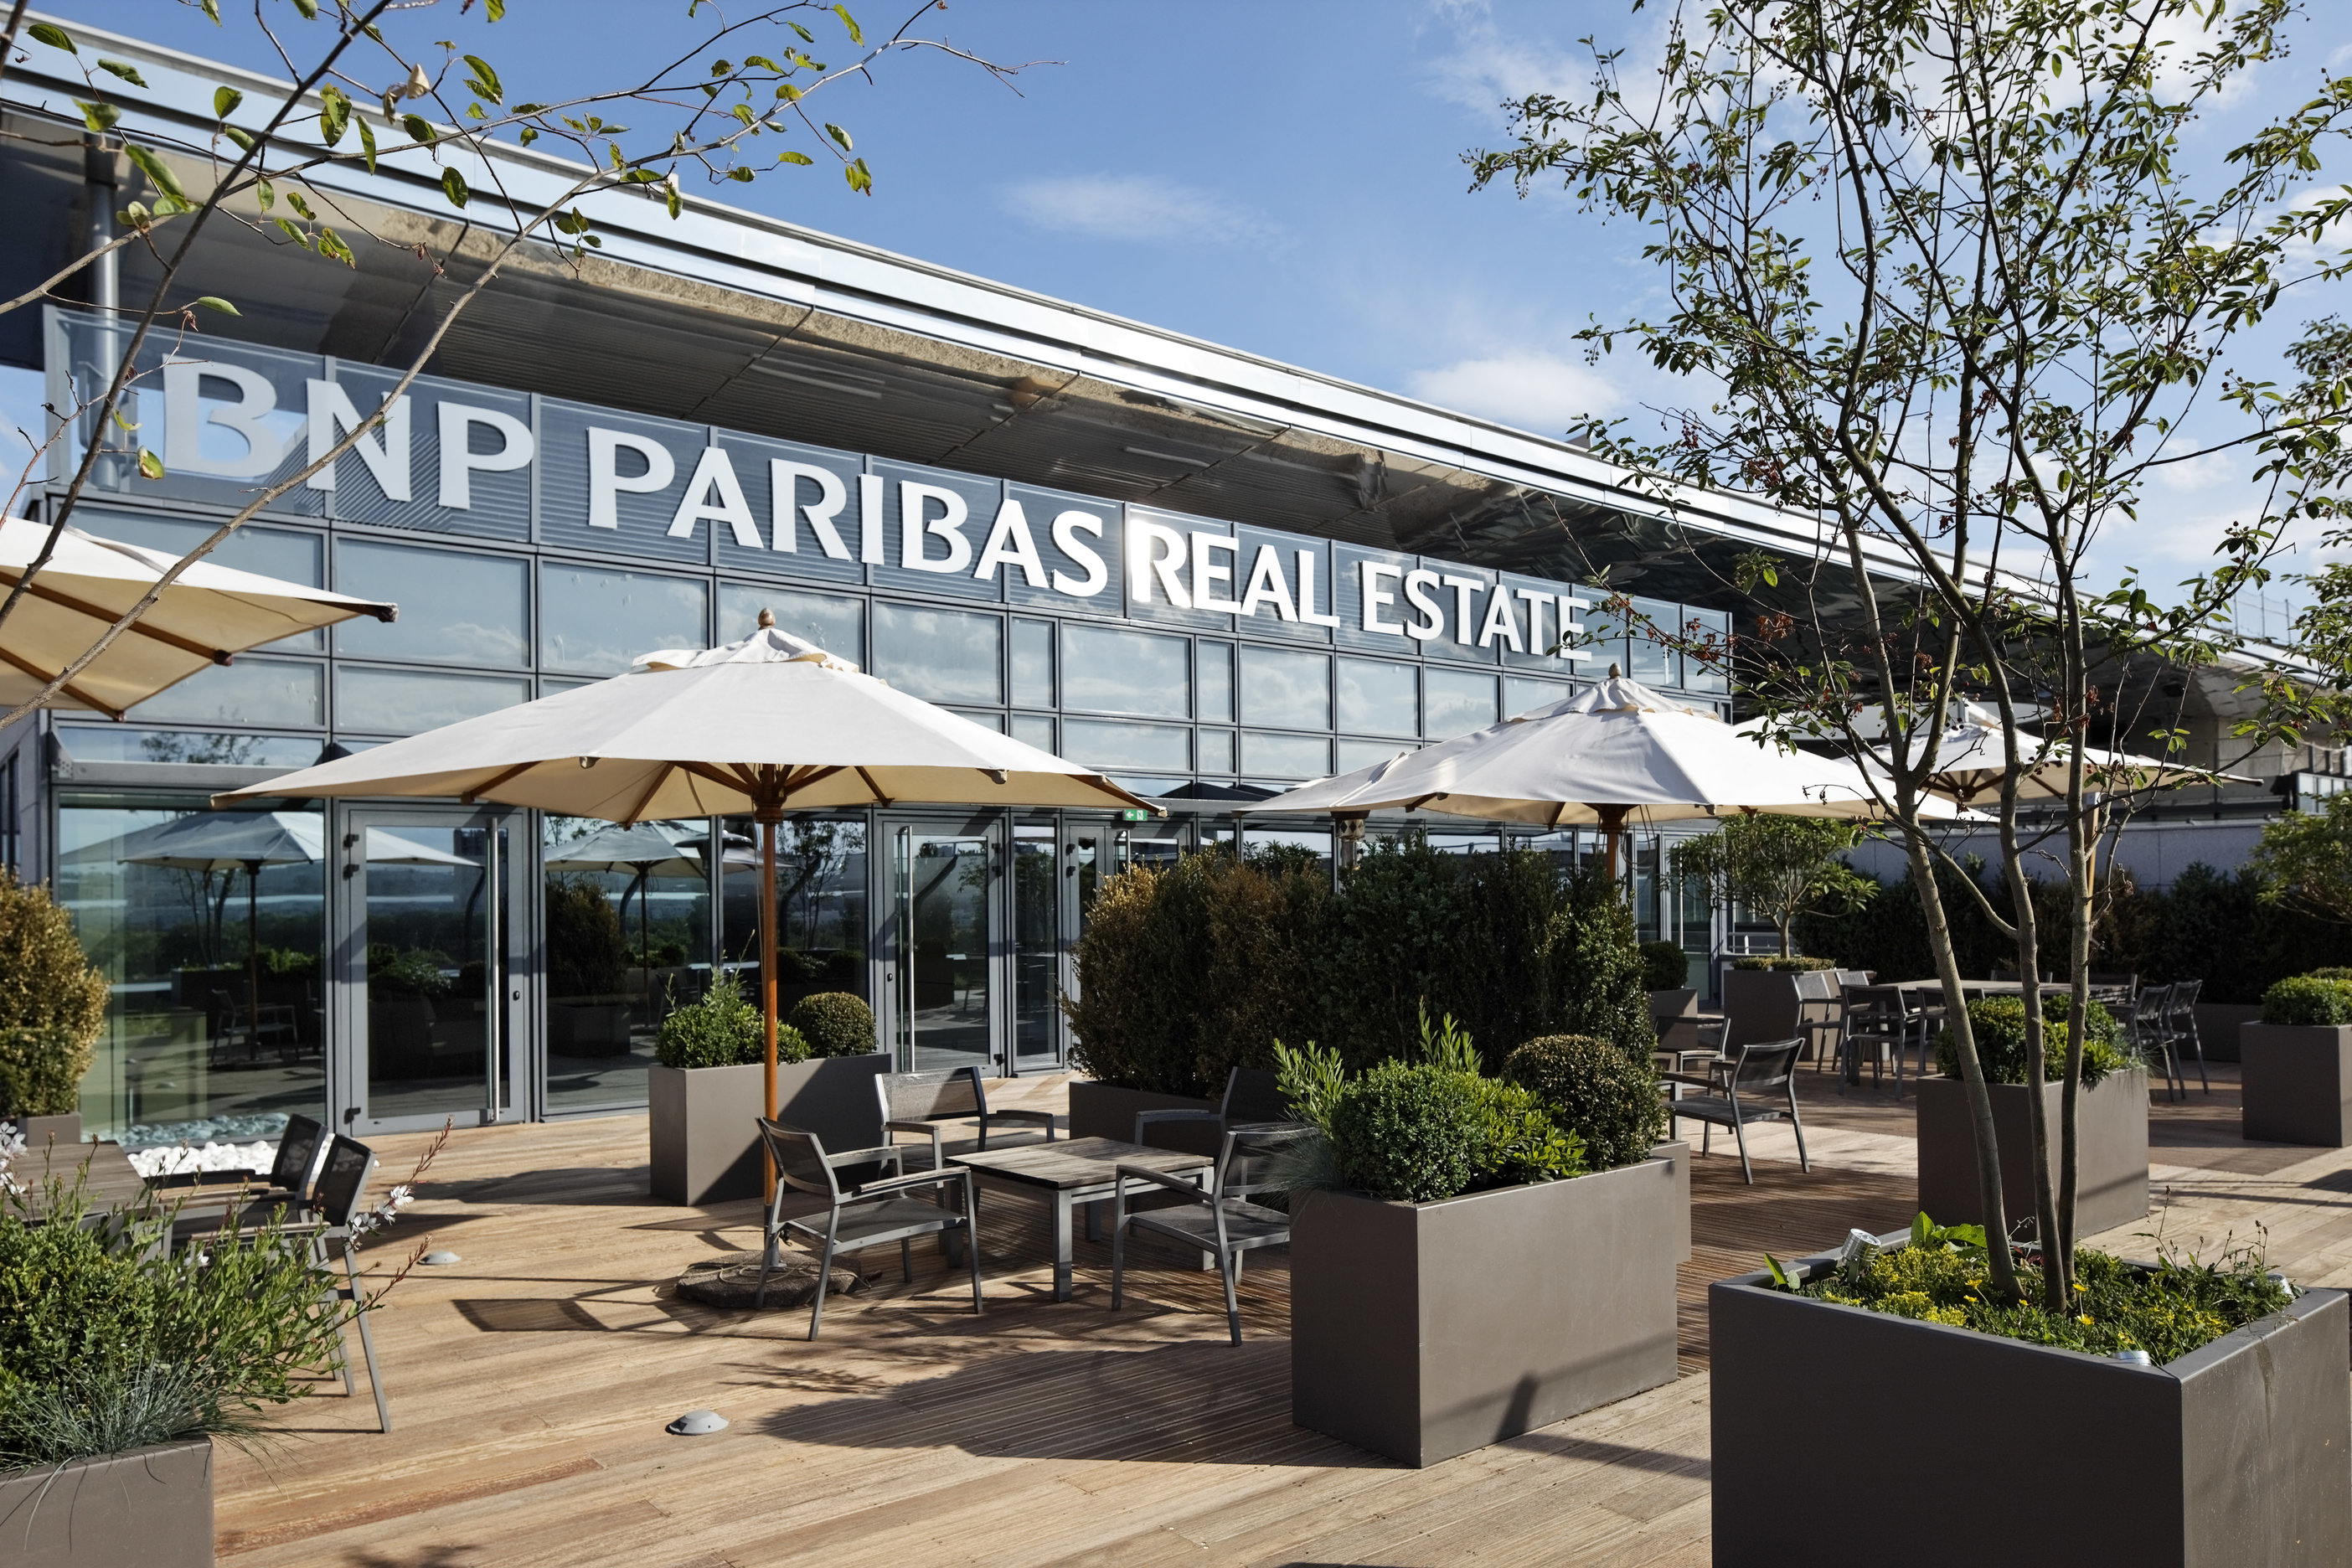 BNP Paribas Real Estate: Labroup is the ideal partner for document ...